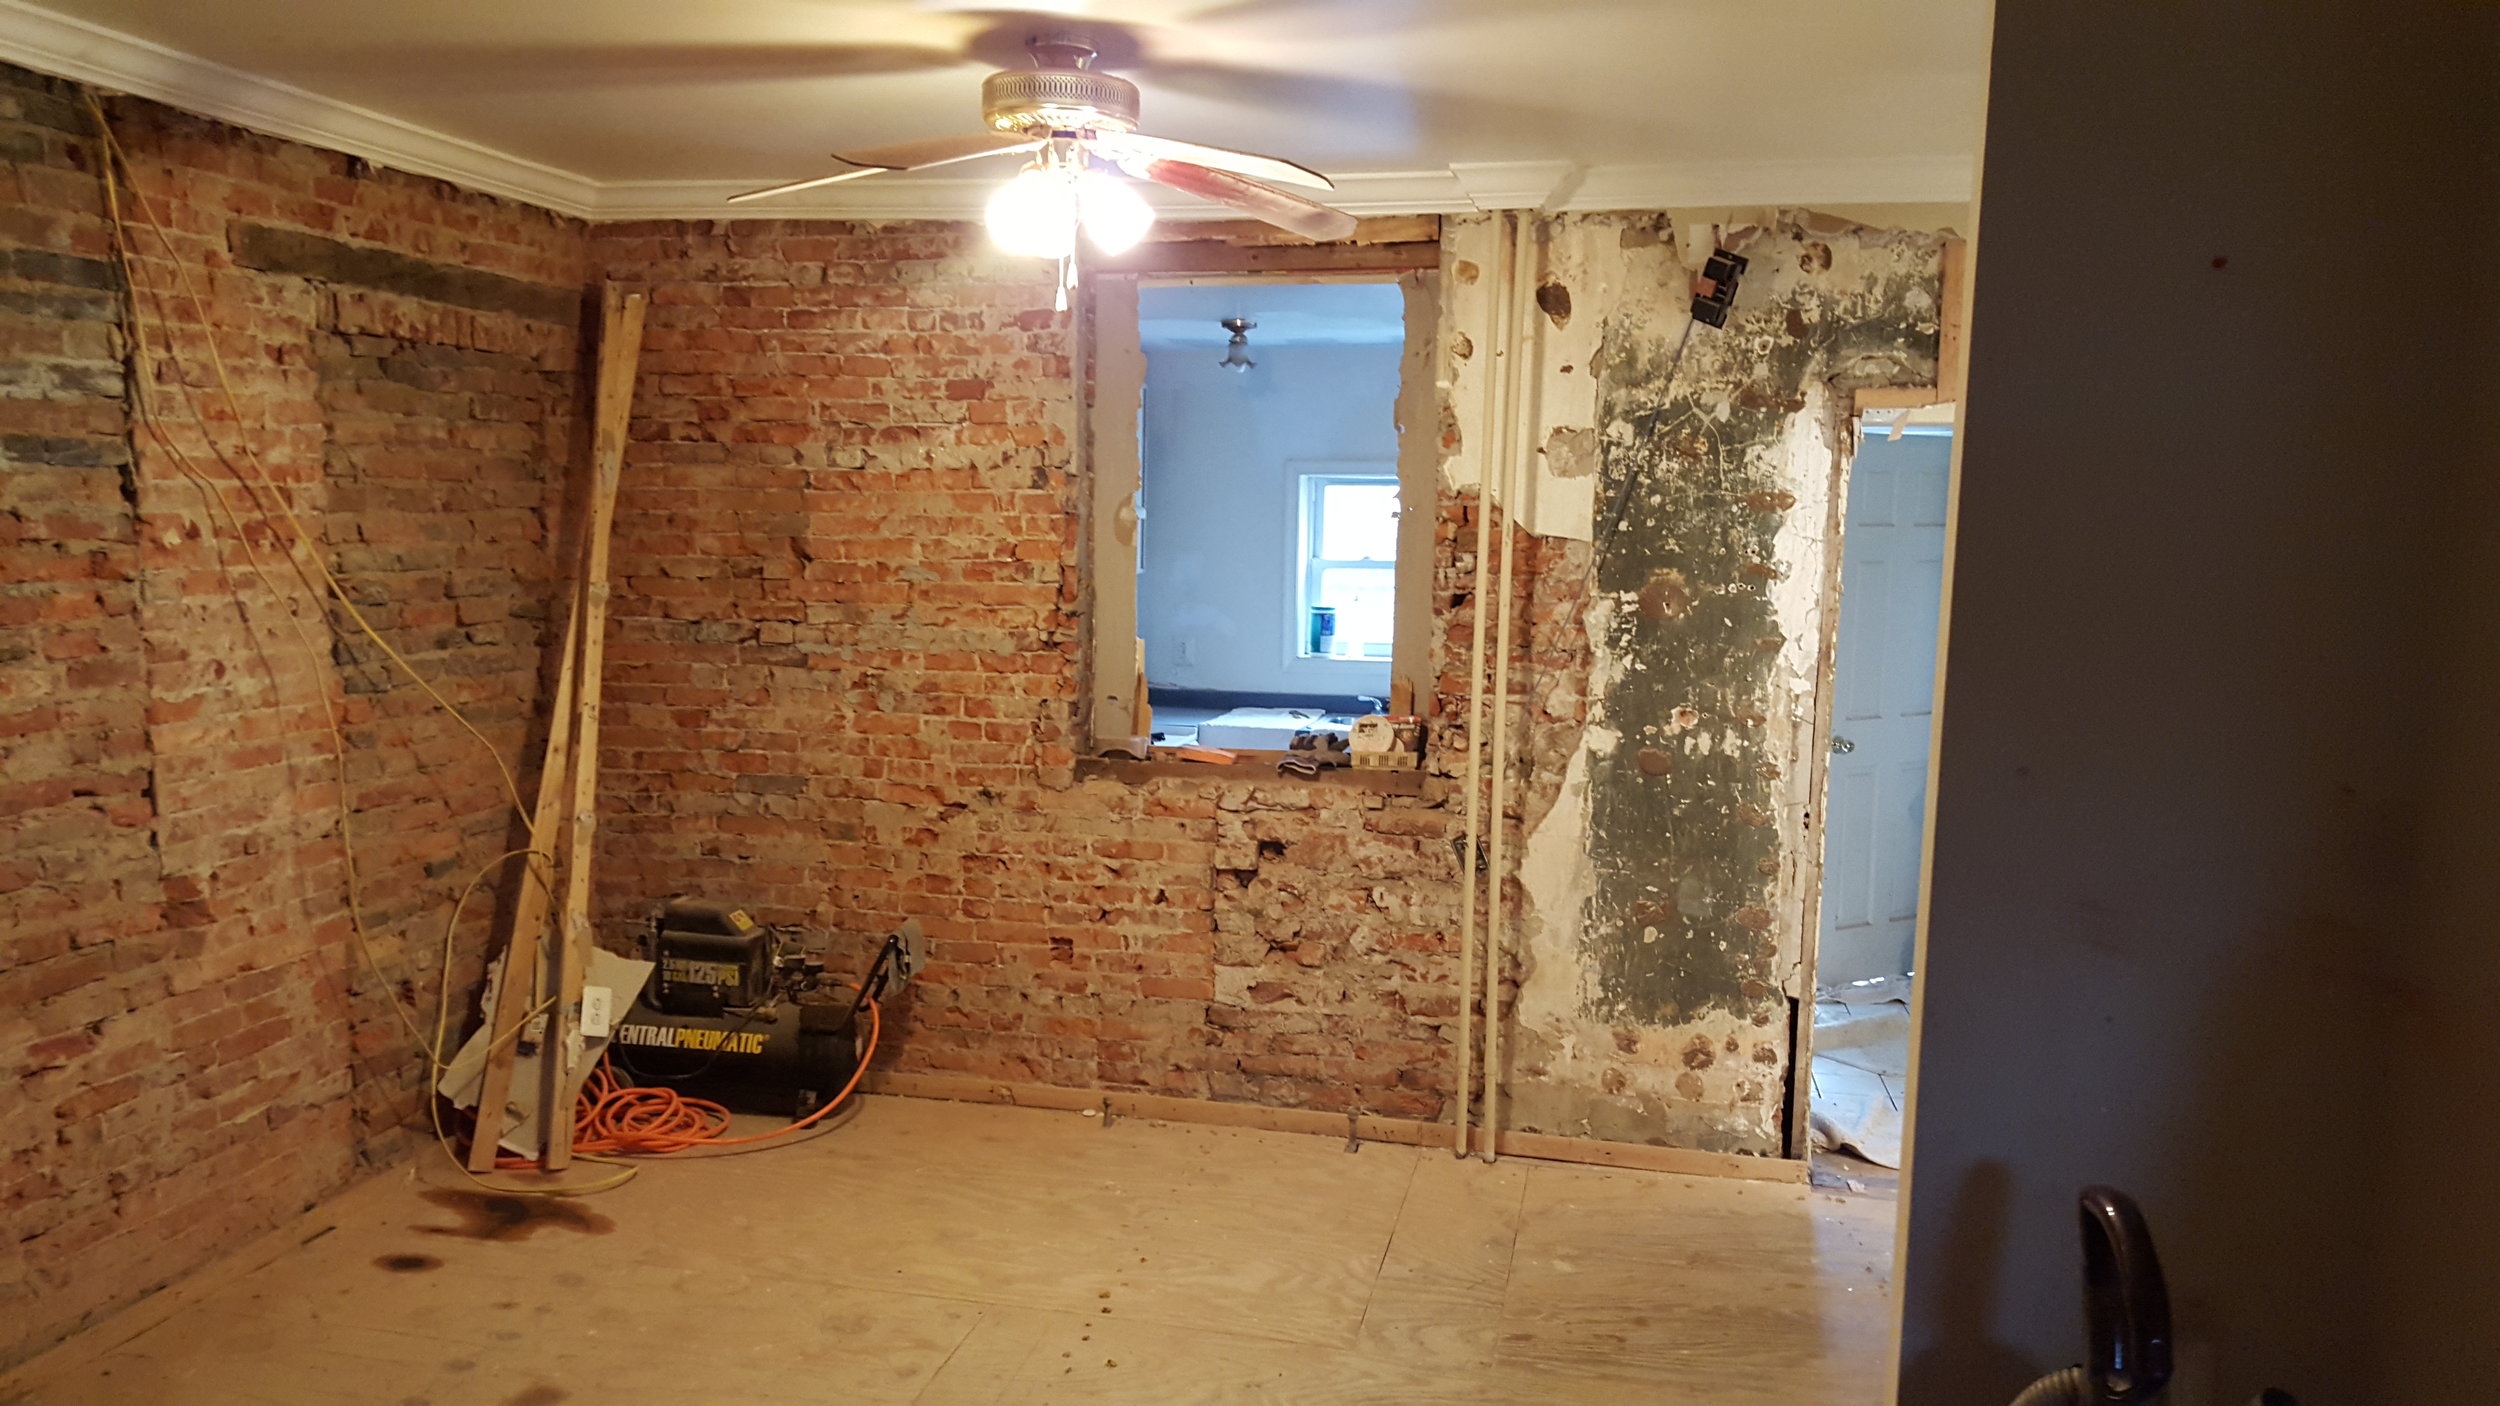 These brick walls tell a story of many changes over time. Much of the brick will remain exposed.